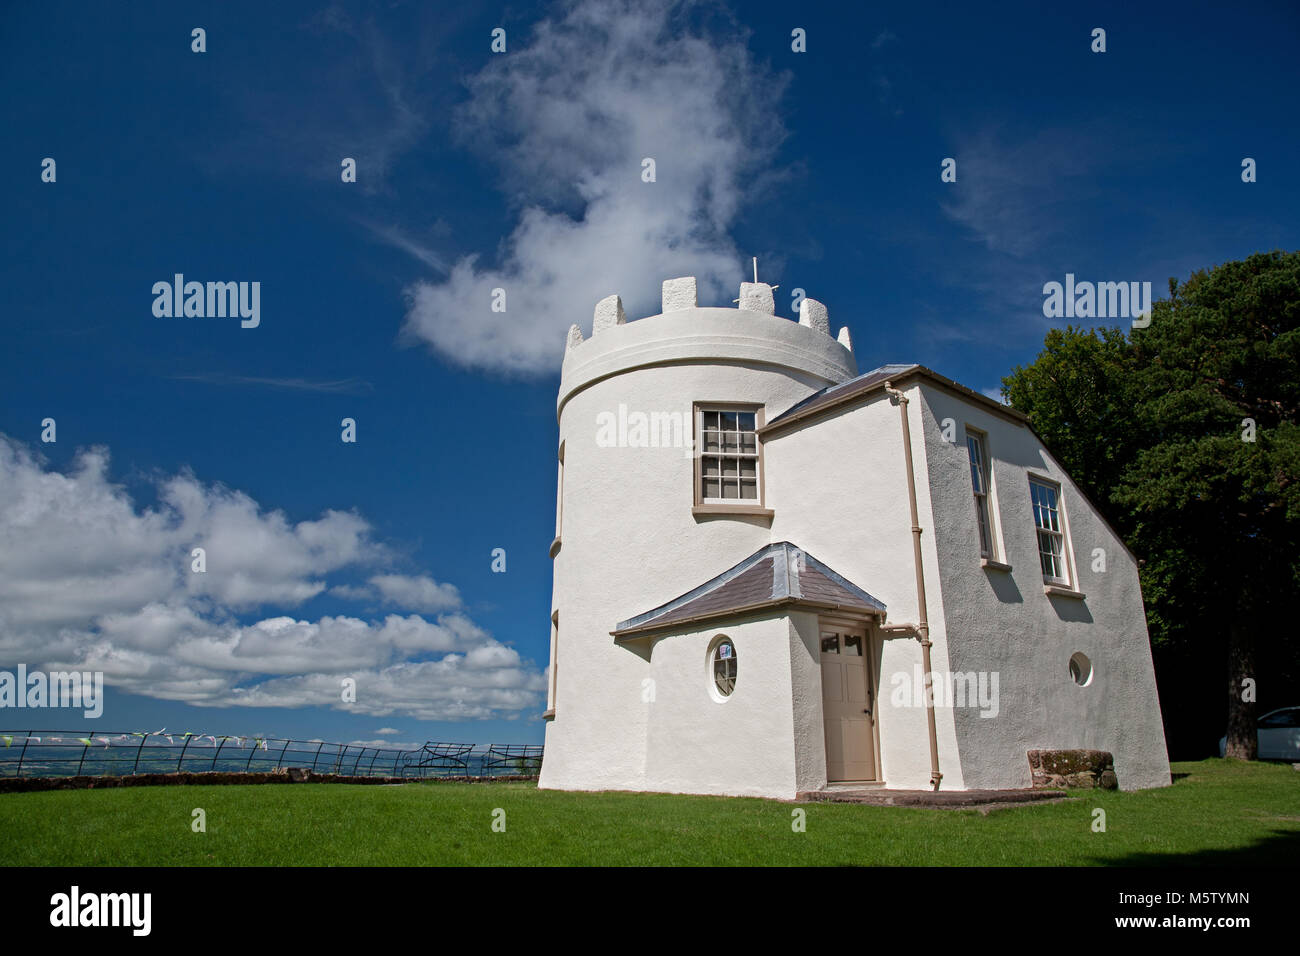 The Round House at the Kymin, Monmouthshire, Wales. Stock Photo